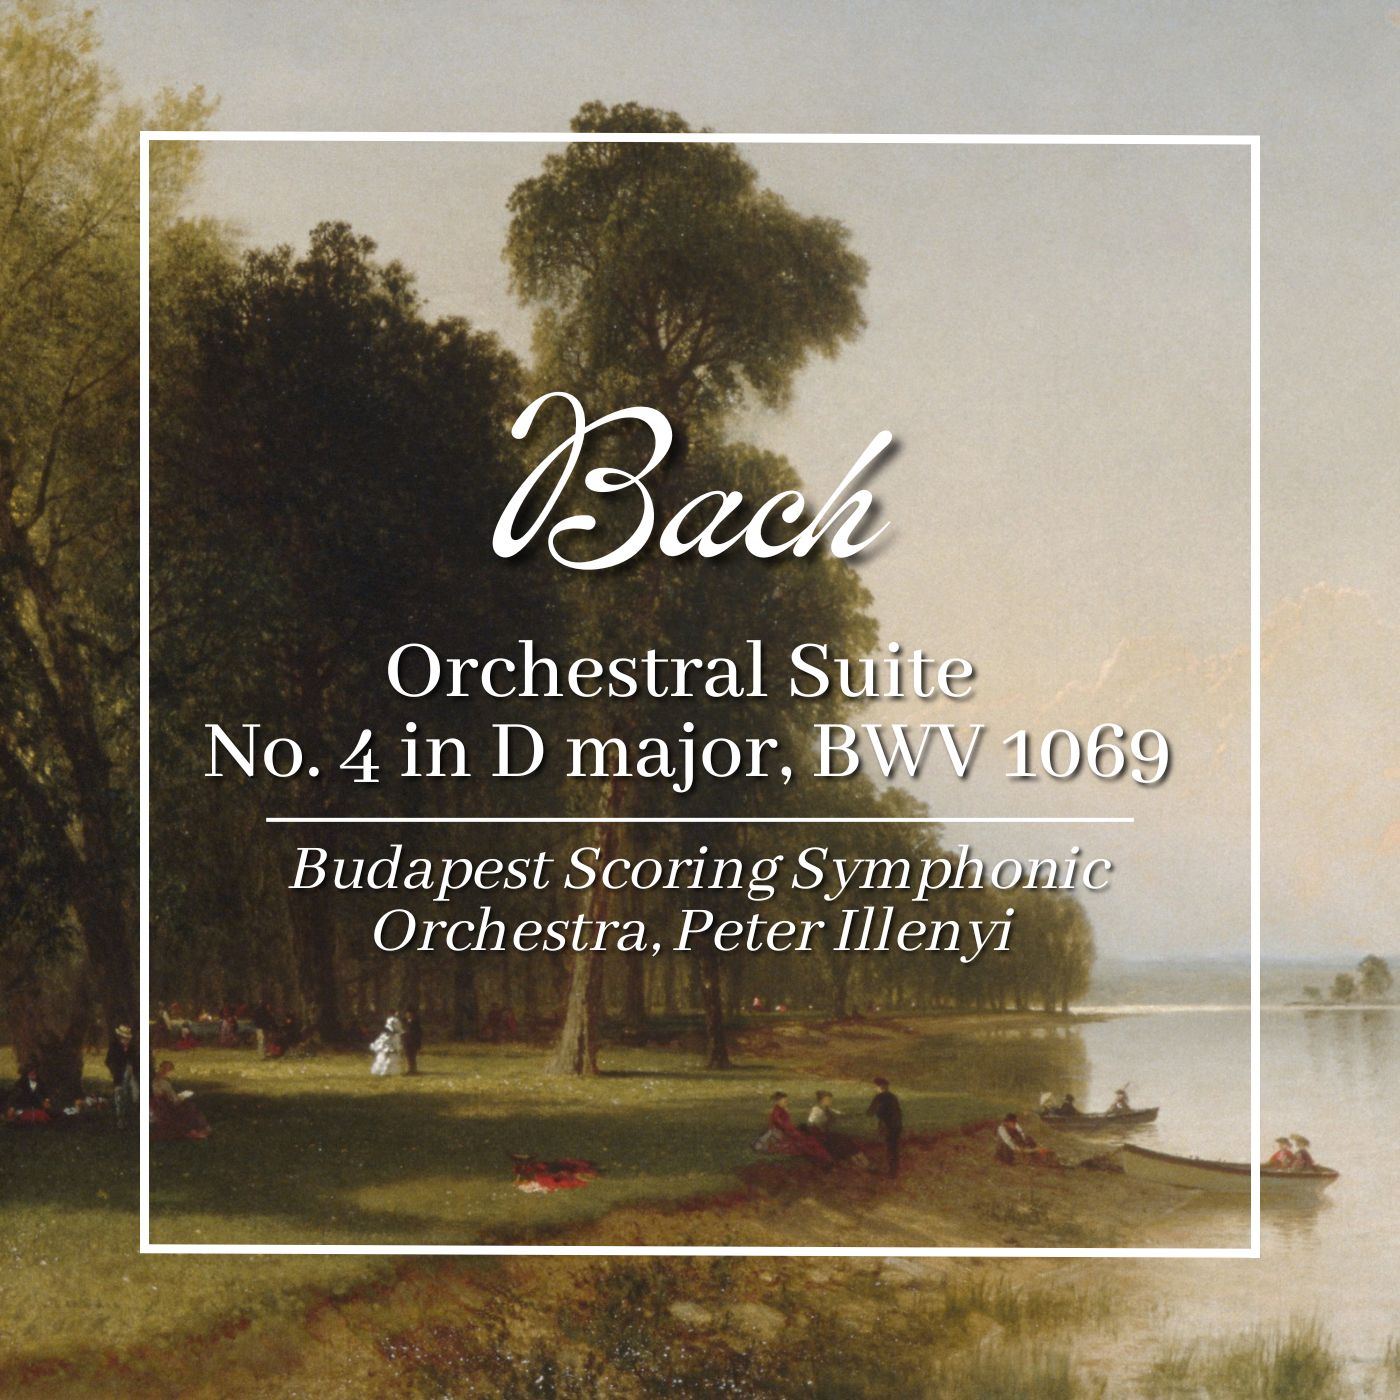 Bach: Orchestral Suite No. 4 in D major, BWV 1069